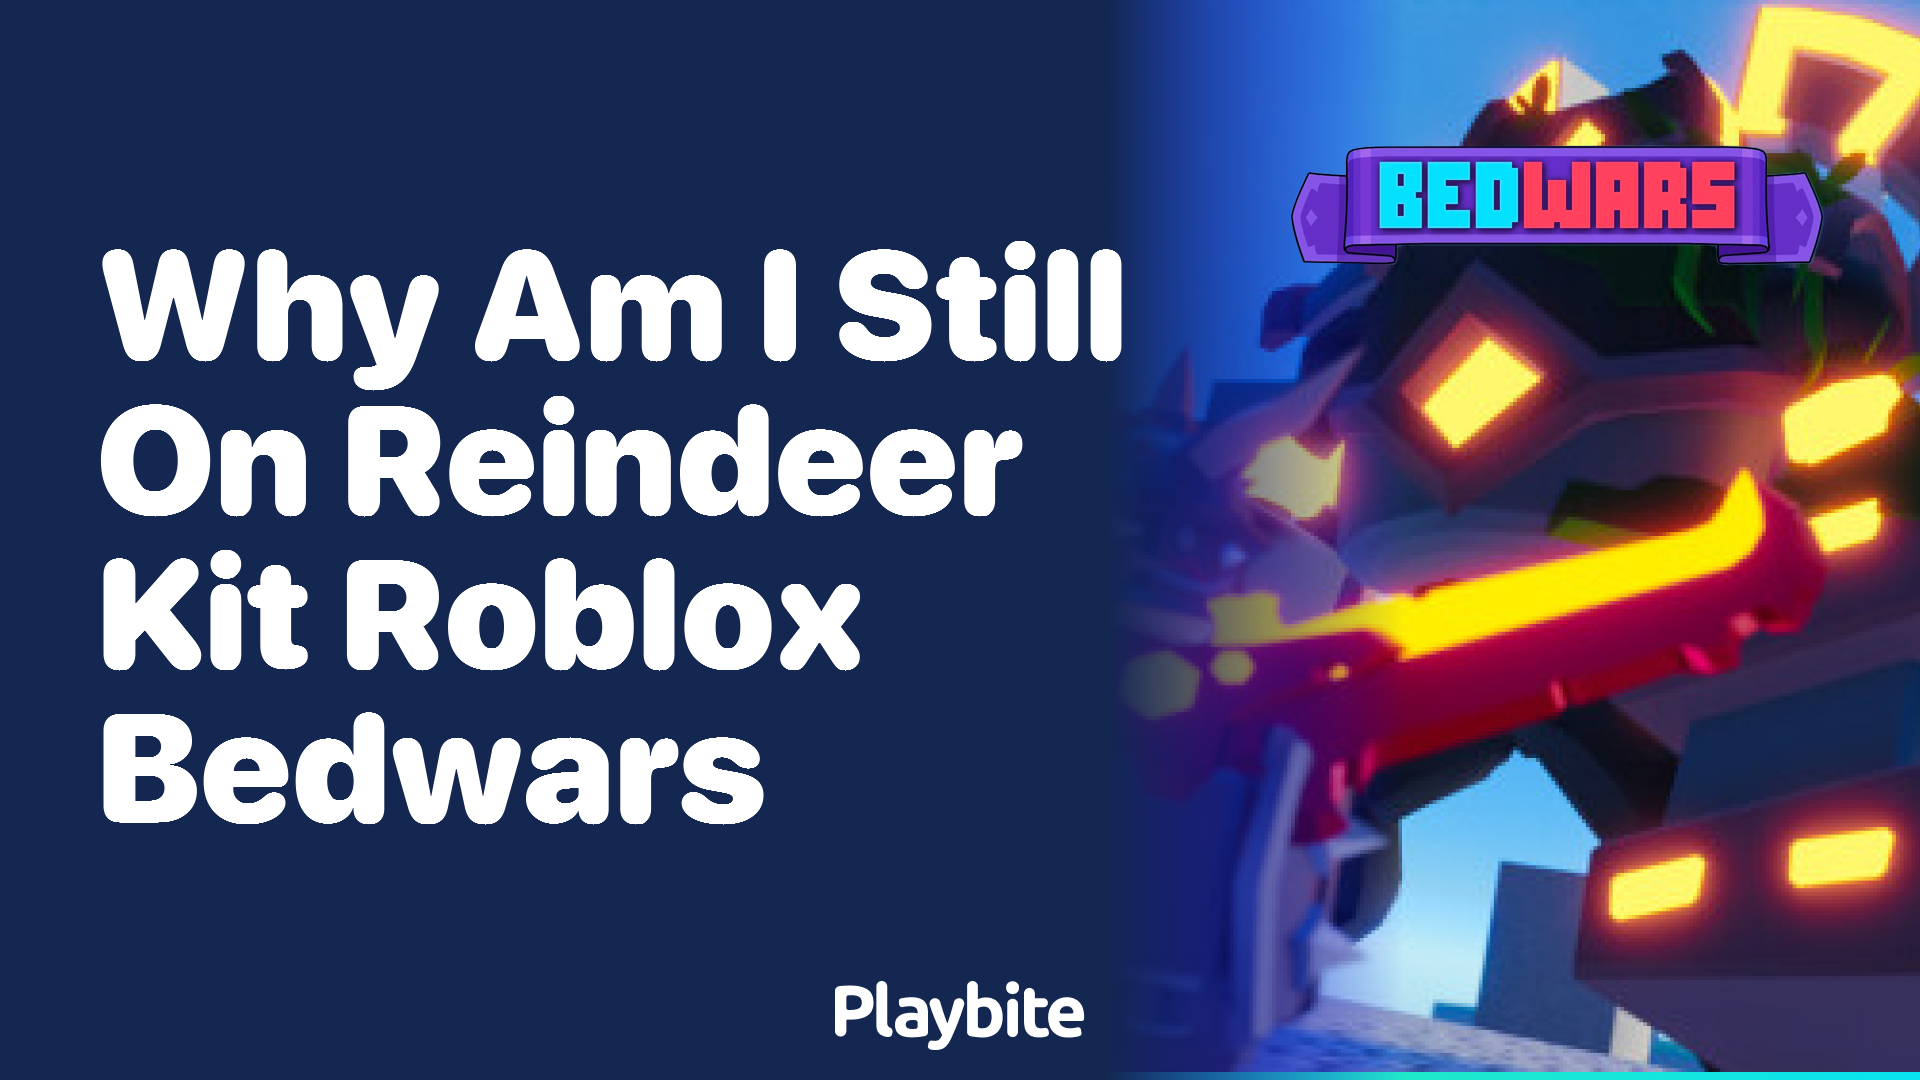 Why am I still on Reindeer Kit in Roblox Bedwars?